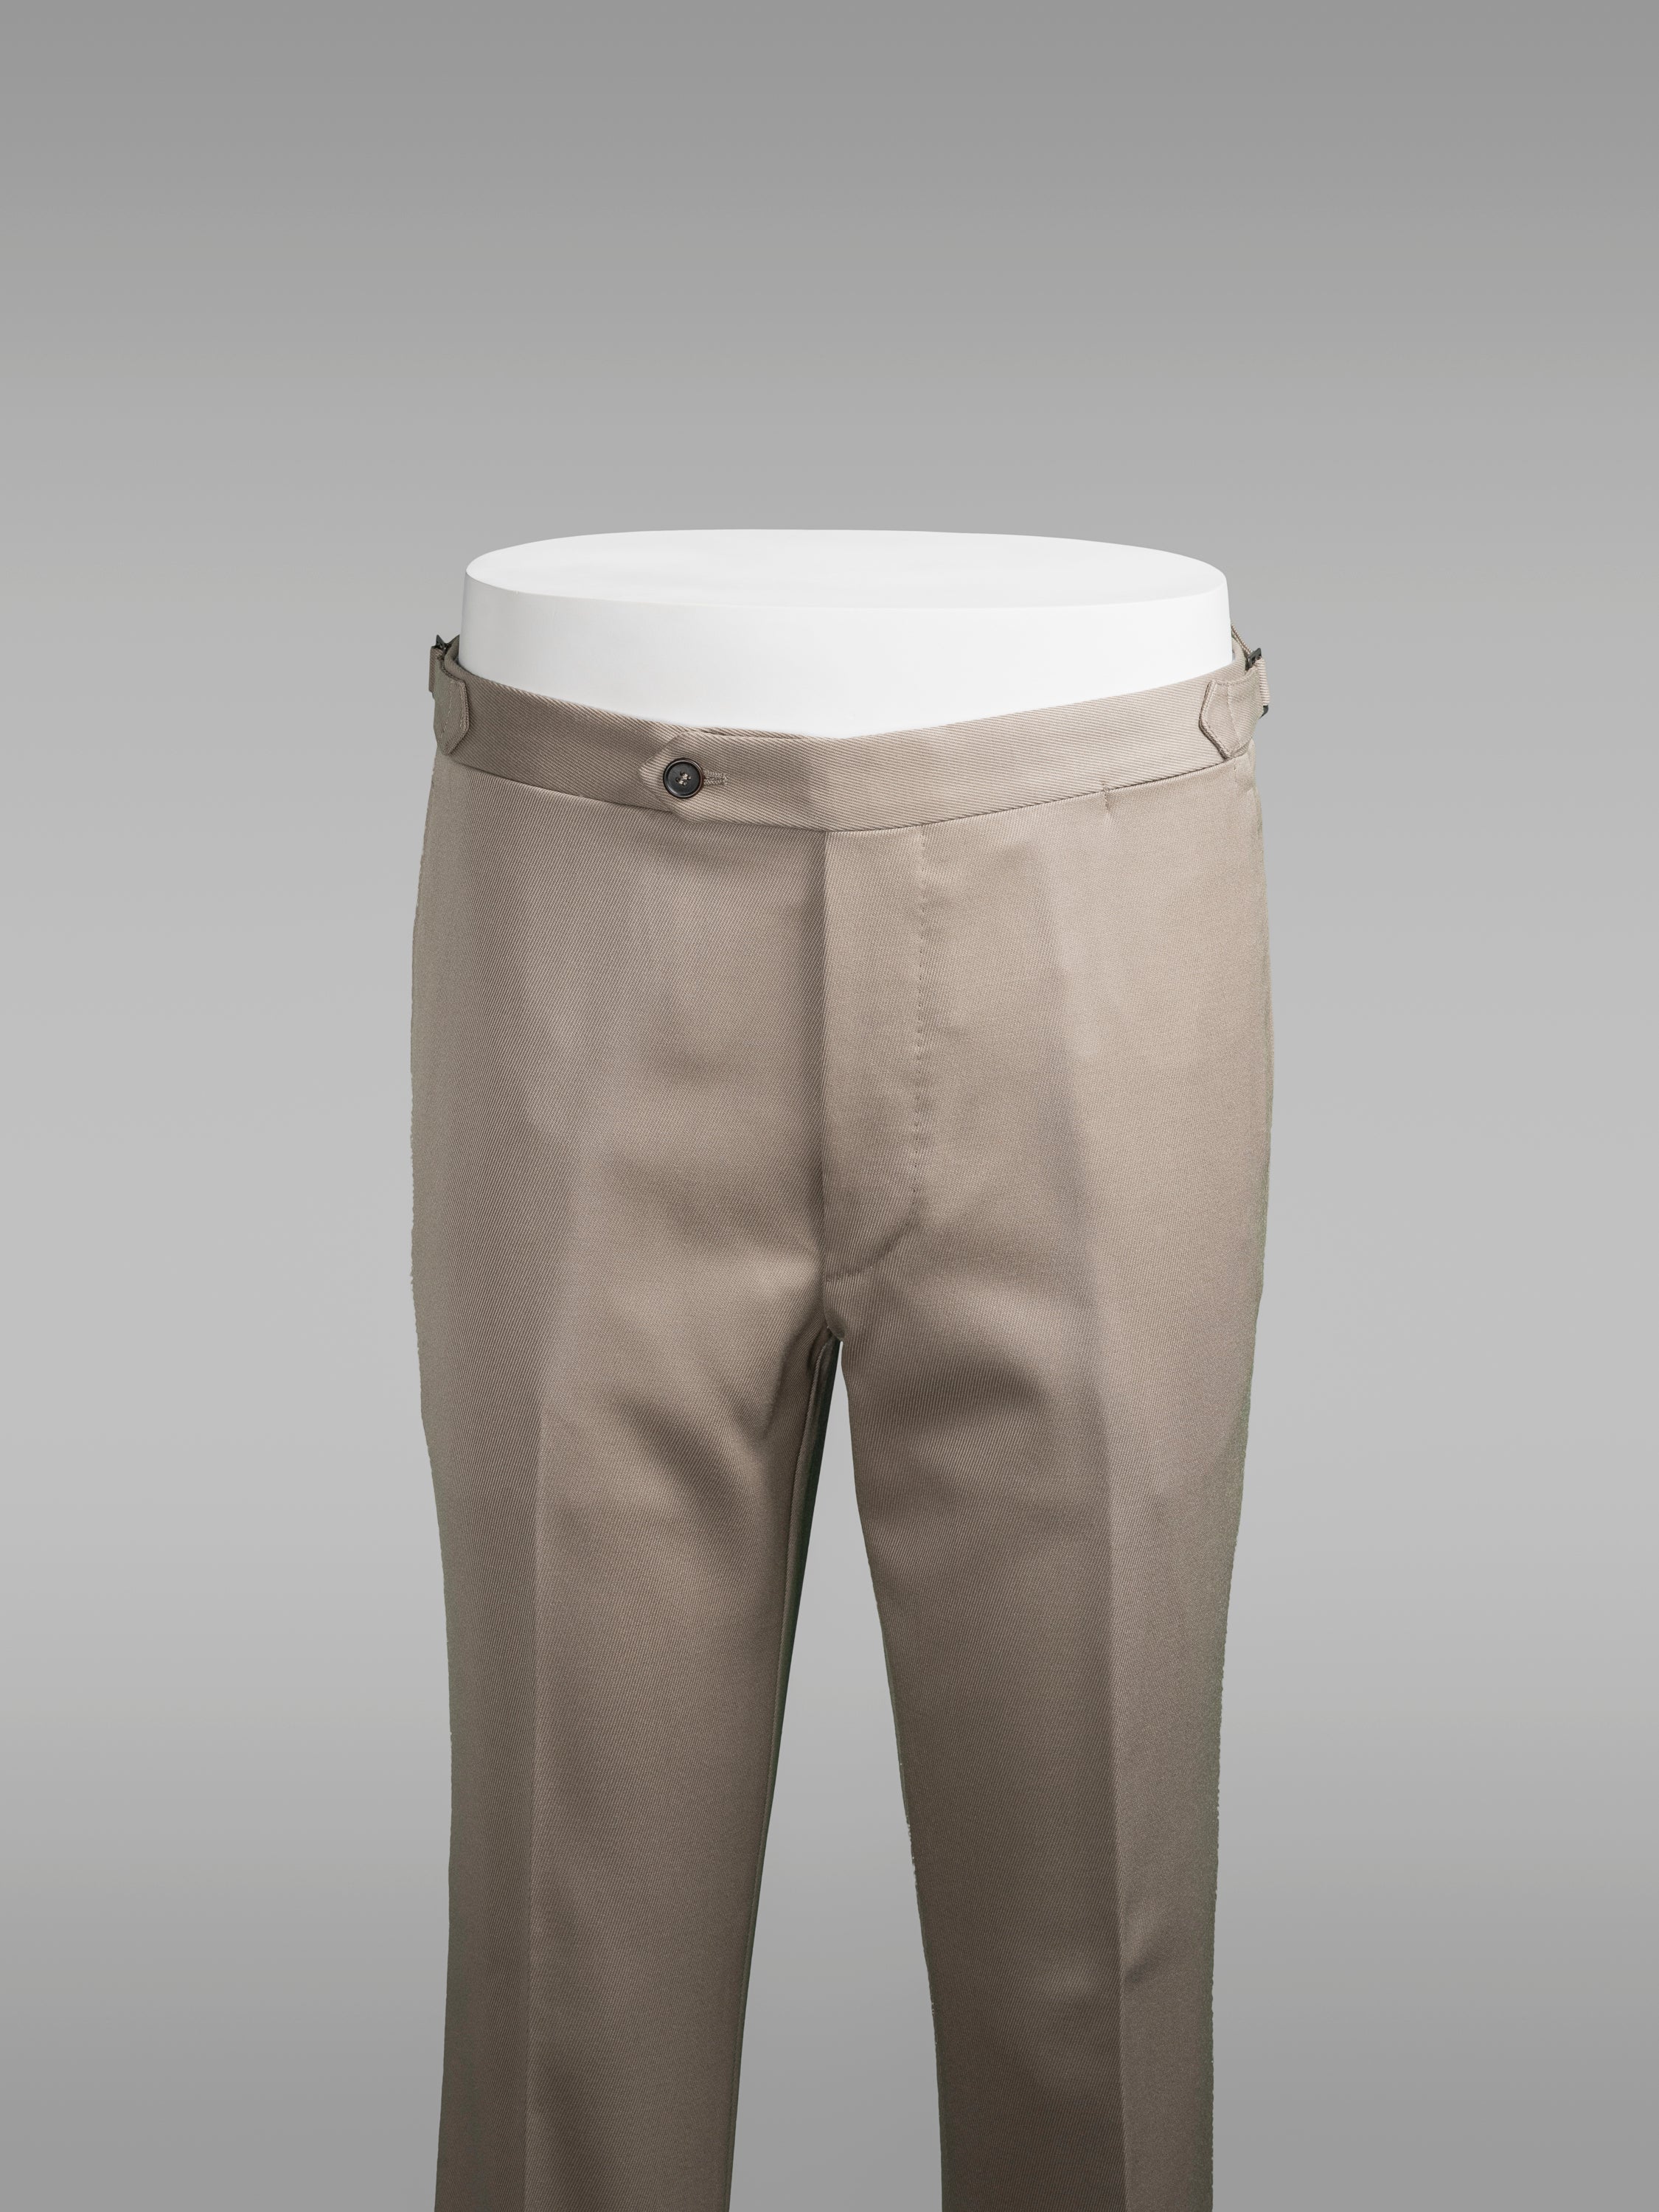 Tan Cavalry Twill Trousers, Men's Country Clothing